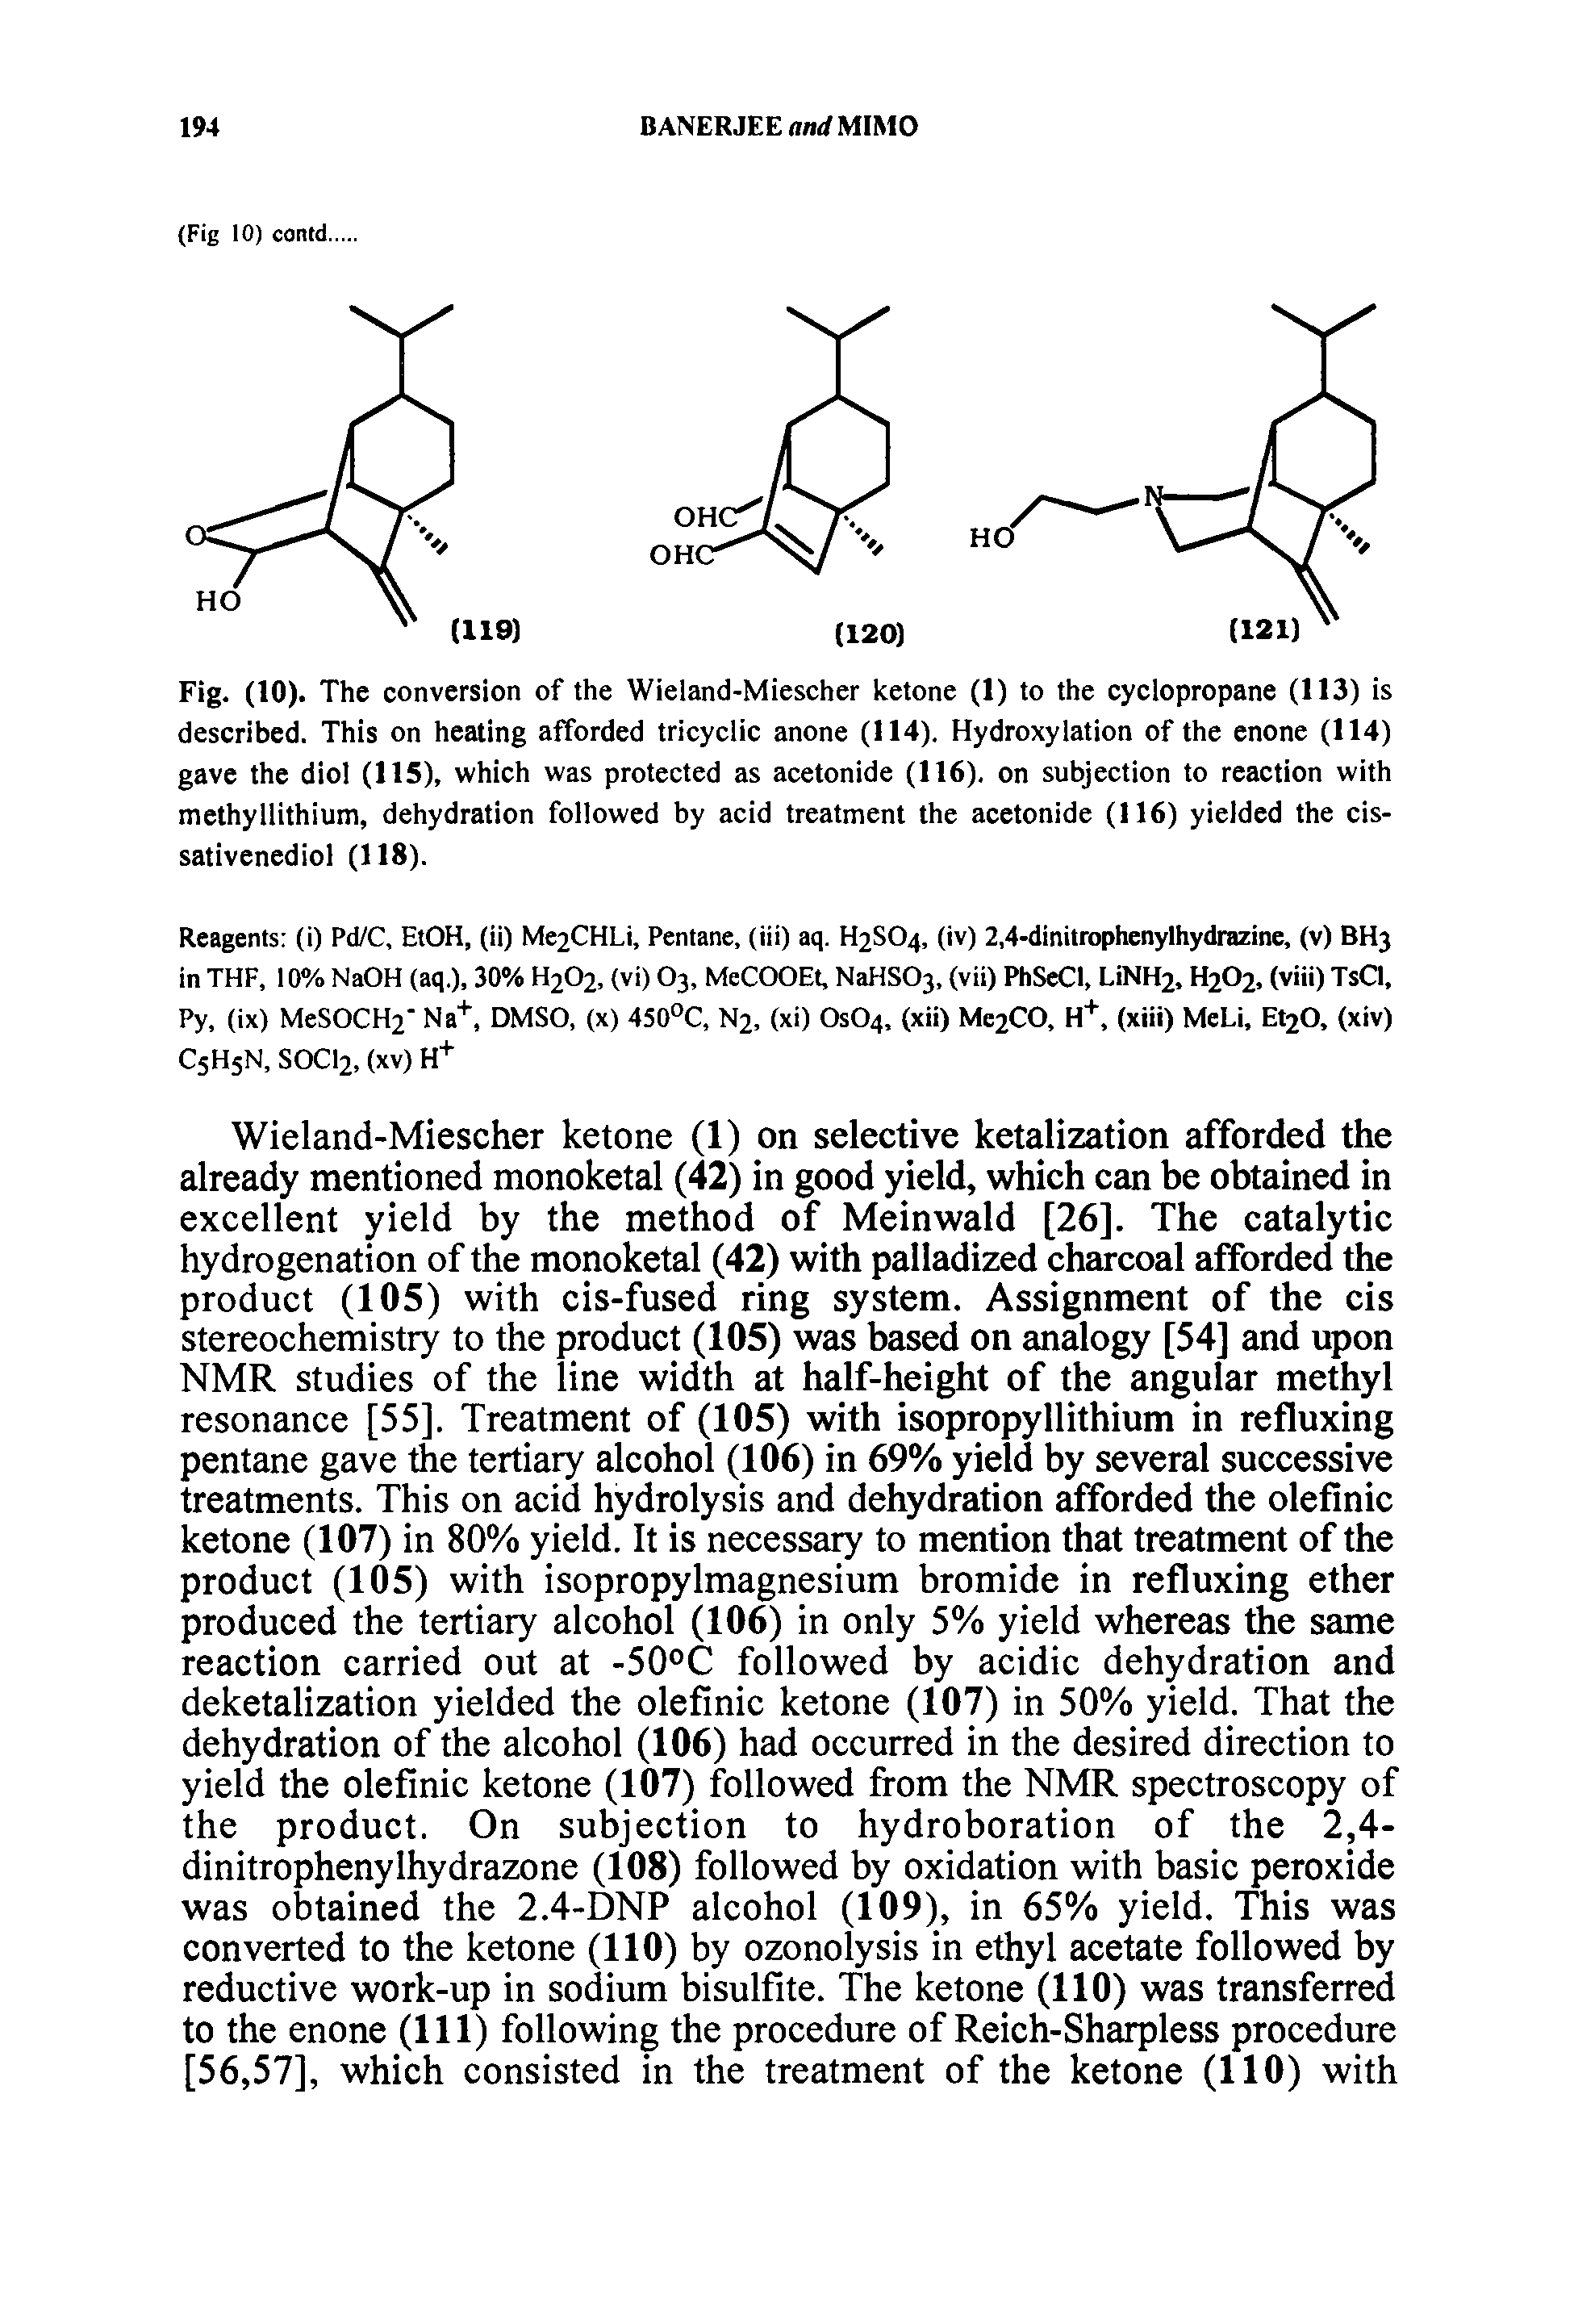 Fig. (10). The conversion of the Wieland-Miescher ketone (1) to the cyclopropane (113) is described. This on heating afforded tricyclic anone (114). Hydroxylation of the enone (114) gave the diol (115), which was protected as acetonide (116), on subjection to reaction with methyllithium, dehydration followed by acid treatment the acetonide (116) yielded the cis-sativenediol (118).